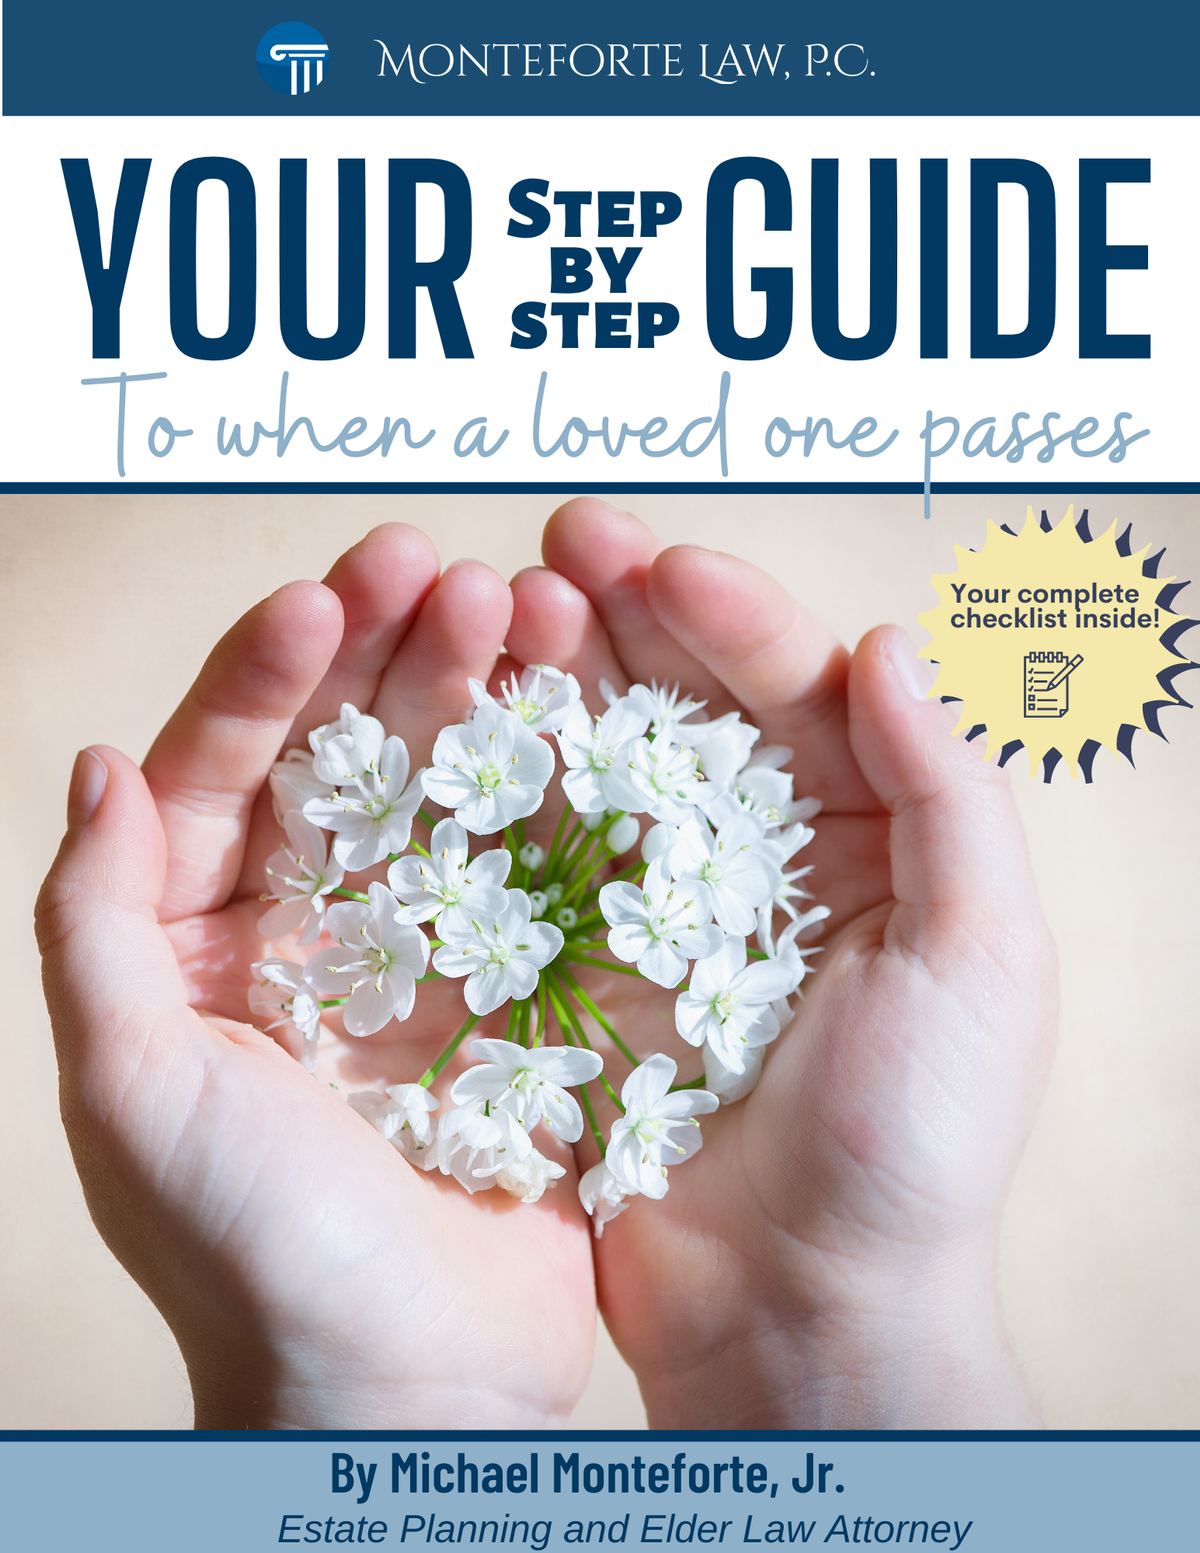 What To Do When A Loved One Passes Away Checklist